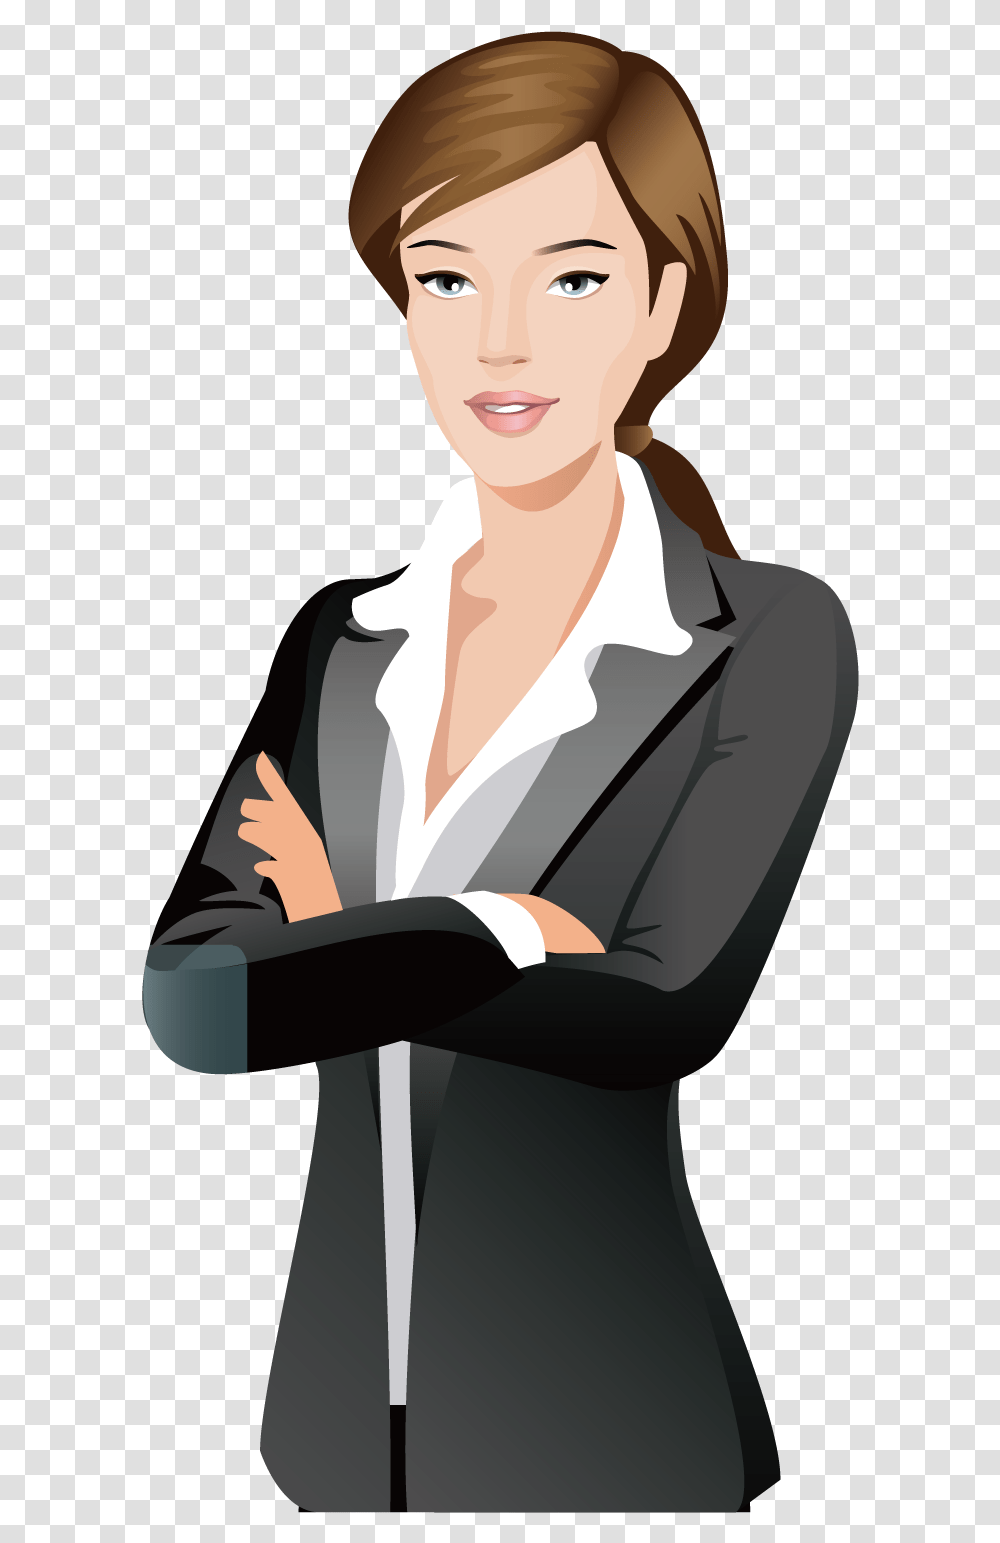 Businessperson Cartoon Silhouette Business Woman Vector, Performer, Suit, Overcoat Transparent Png